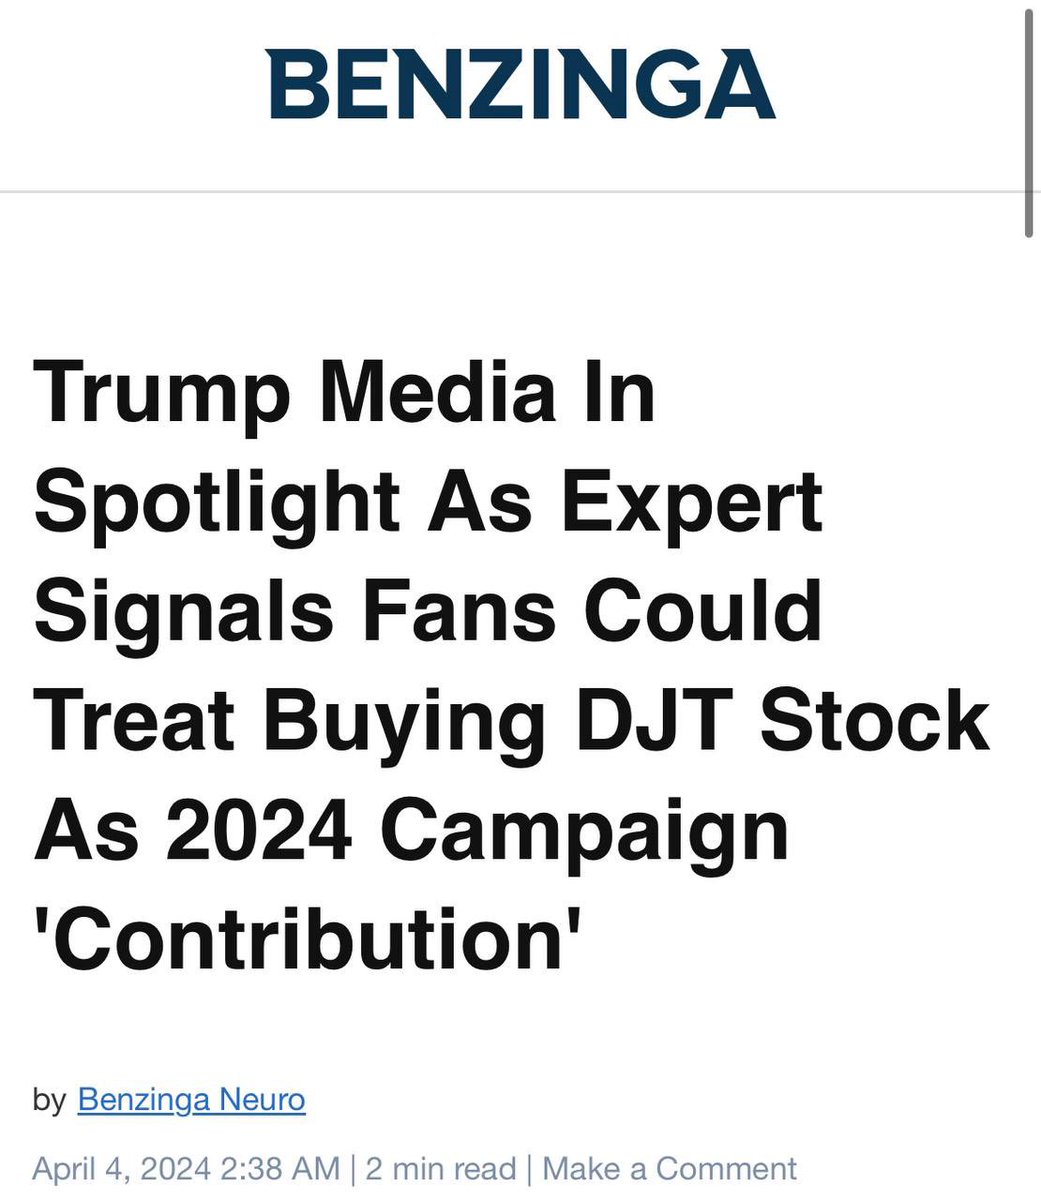 Buying $DJT is a “Campaign Contribution” New article 4/4/24: benzinga.com/amp/content/38…